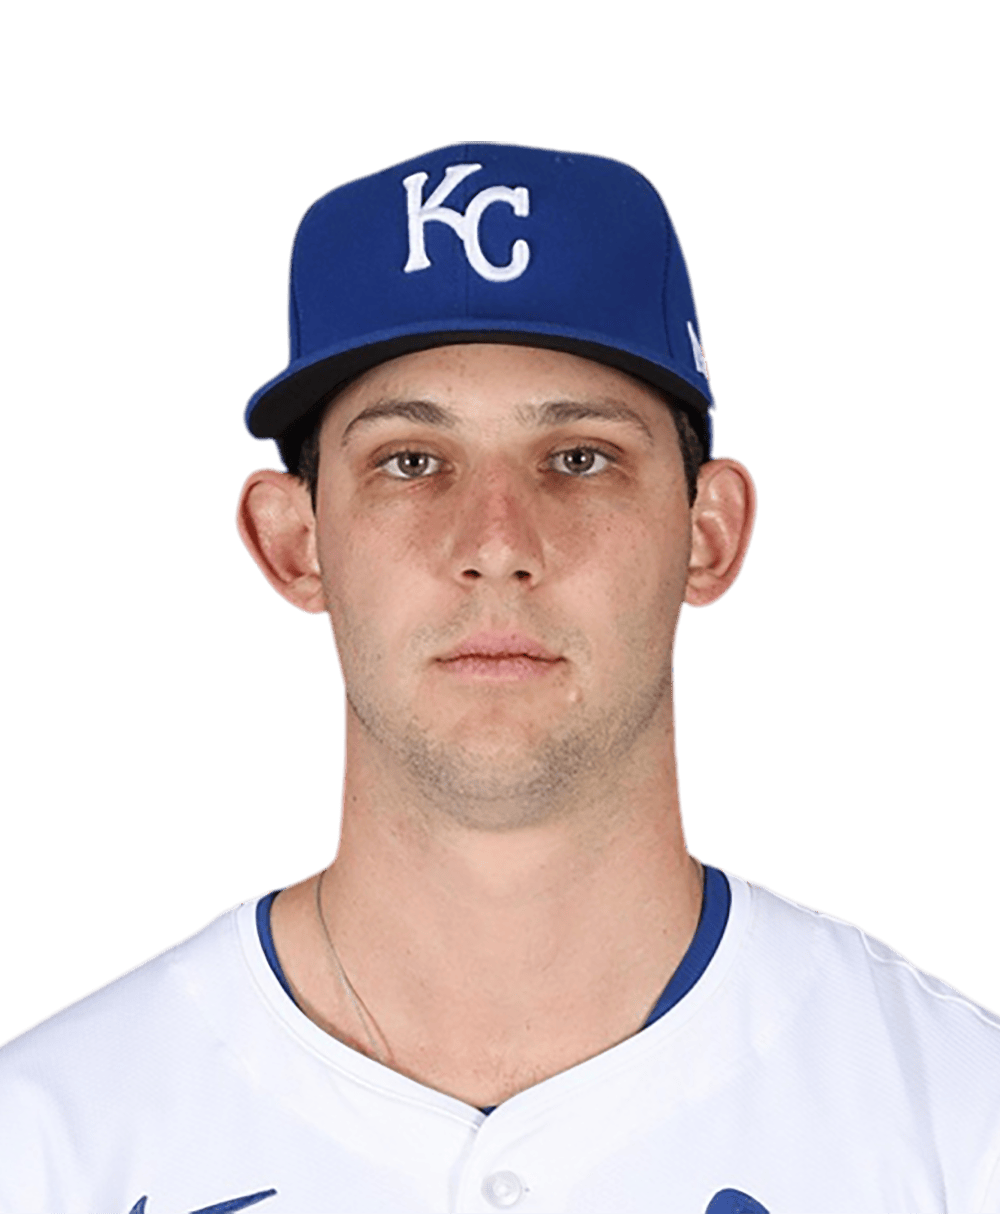 Kansas City Royals show some fight, battling back late before